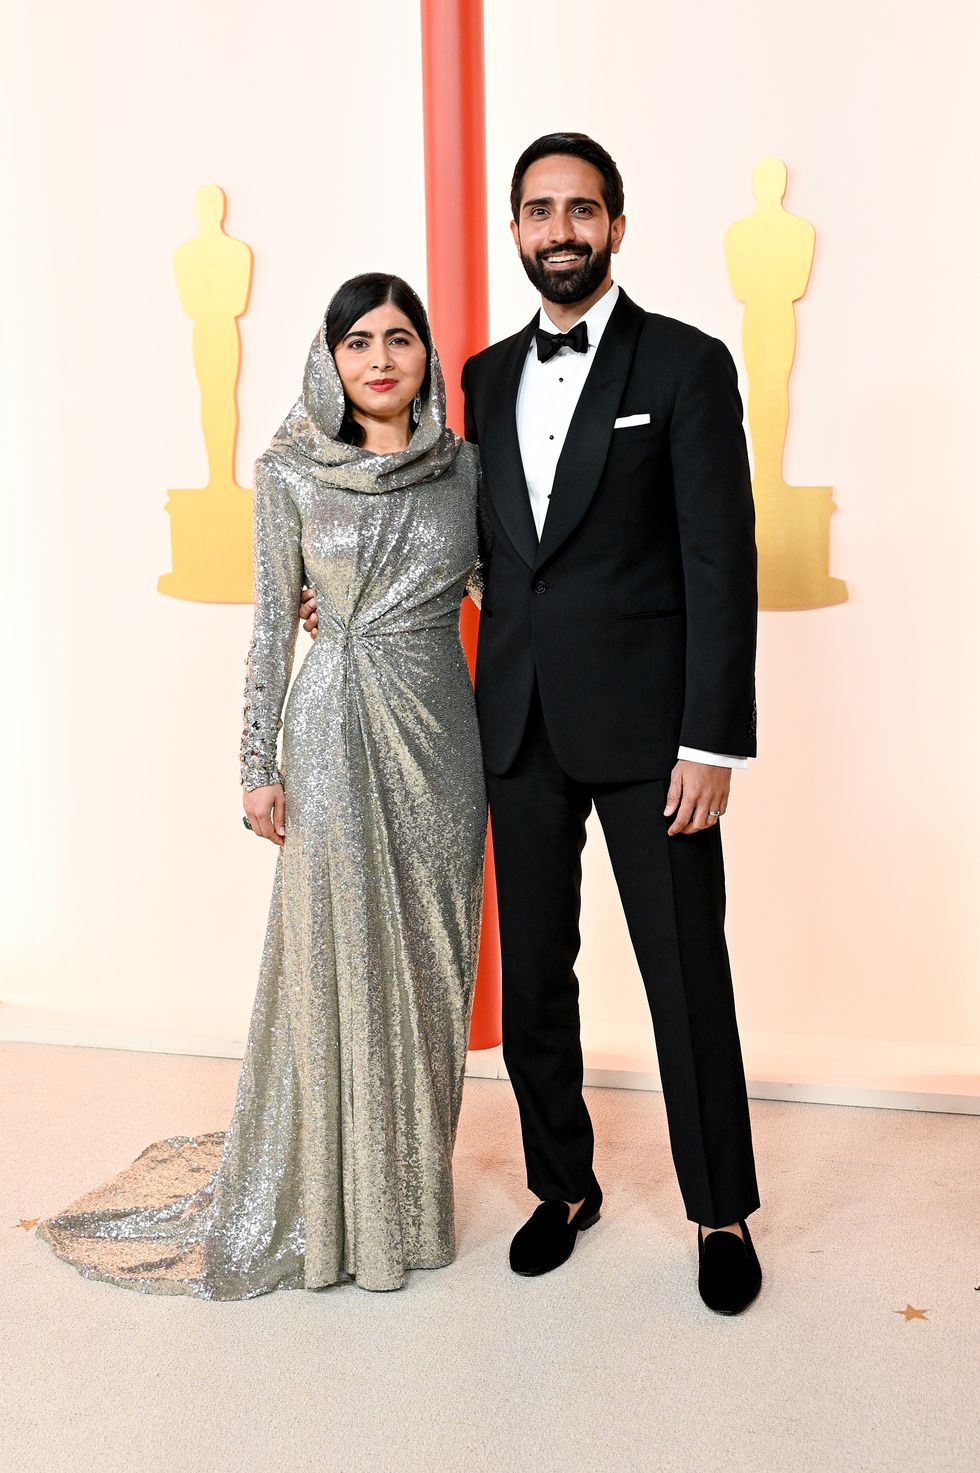 malala yousafzai and asser malik at the 95th annual academy awards held at ovation hollywood on march 12, 2023 in los angeles, california photo by gilbert floresvariety via getty images